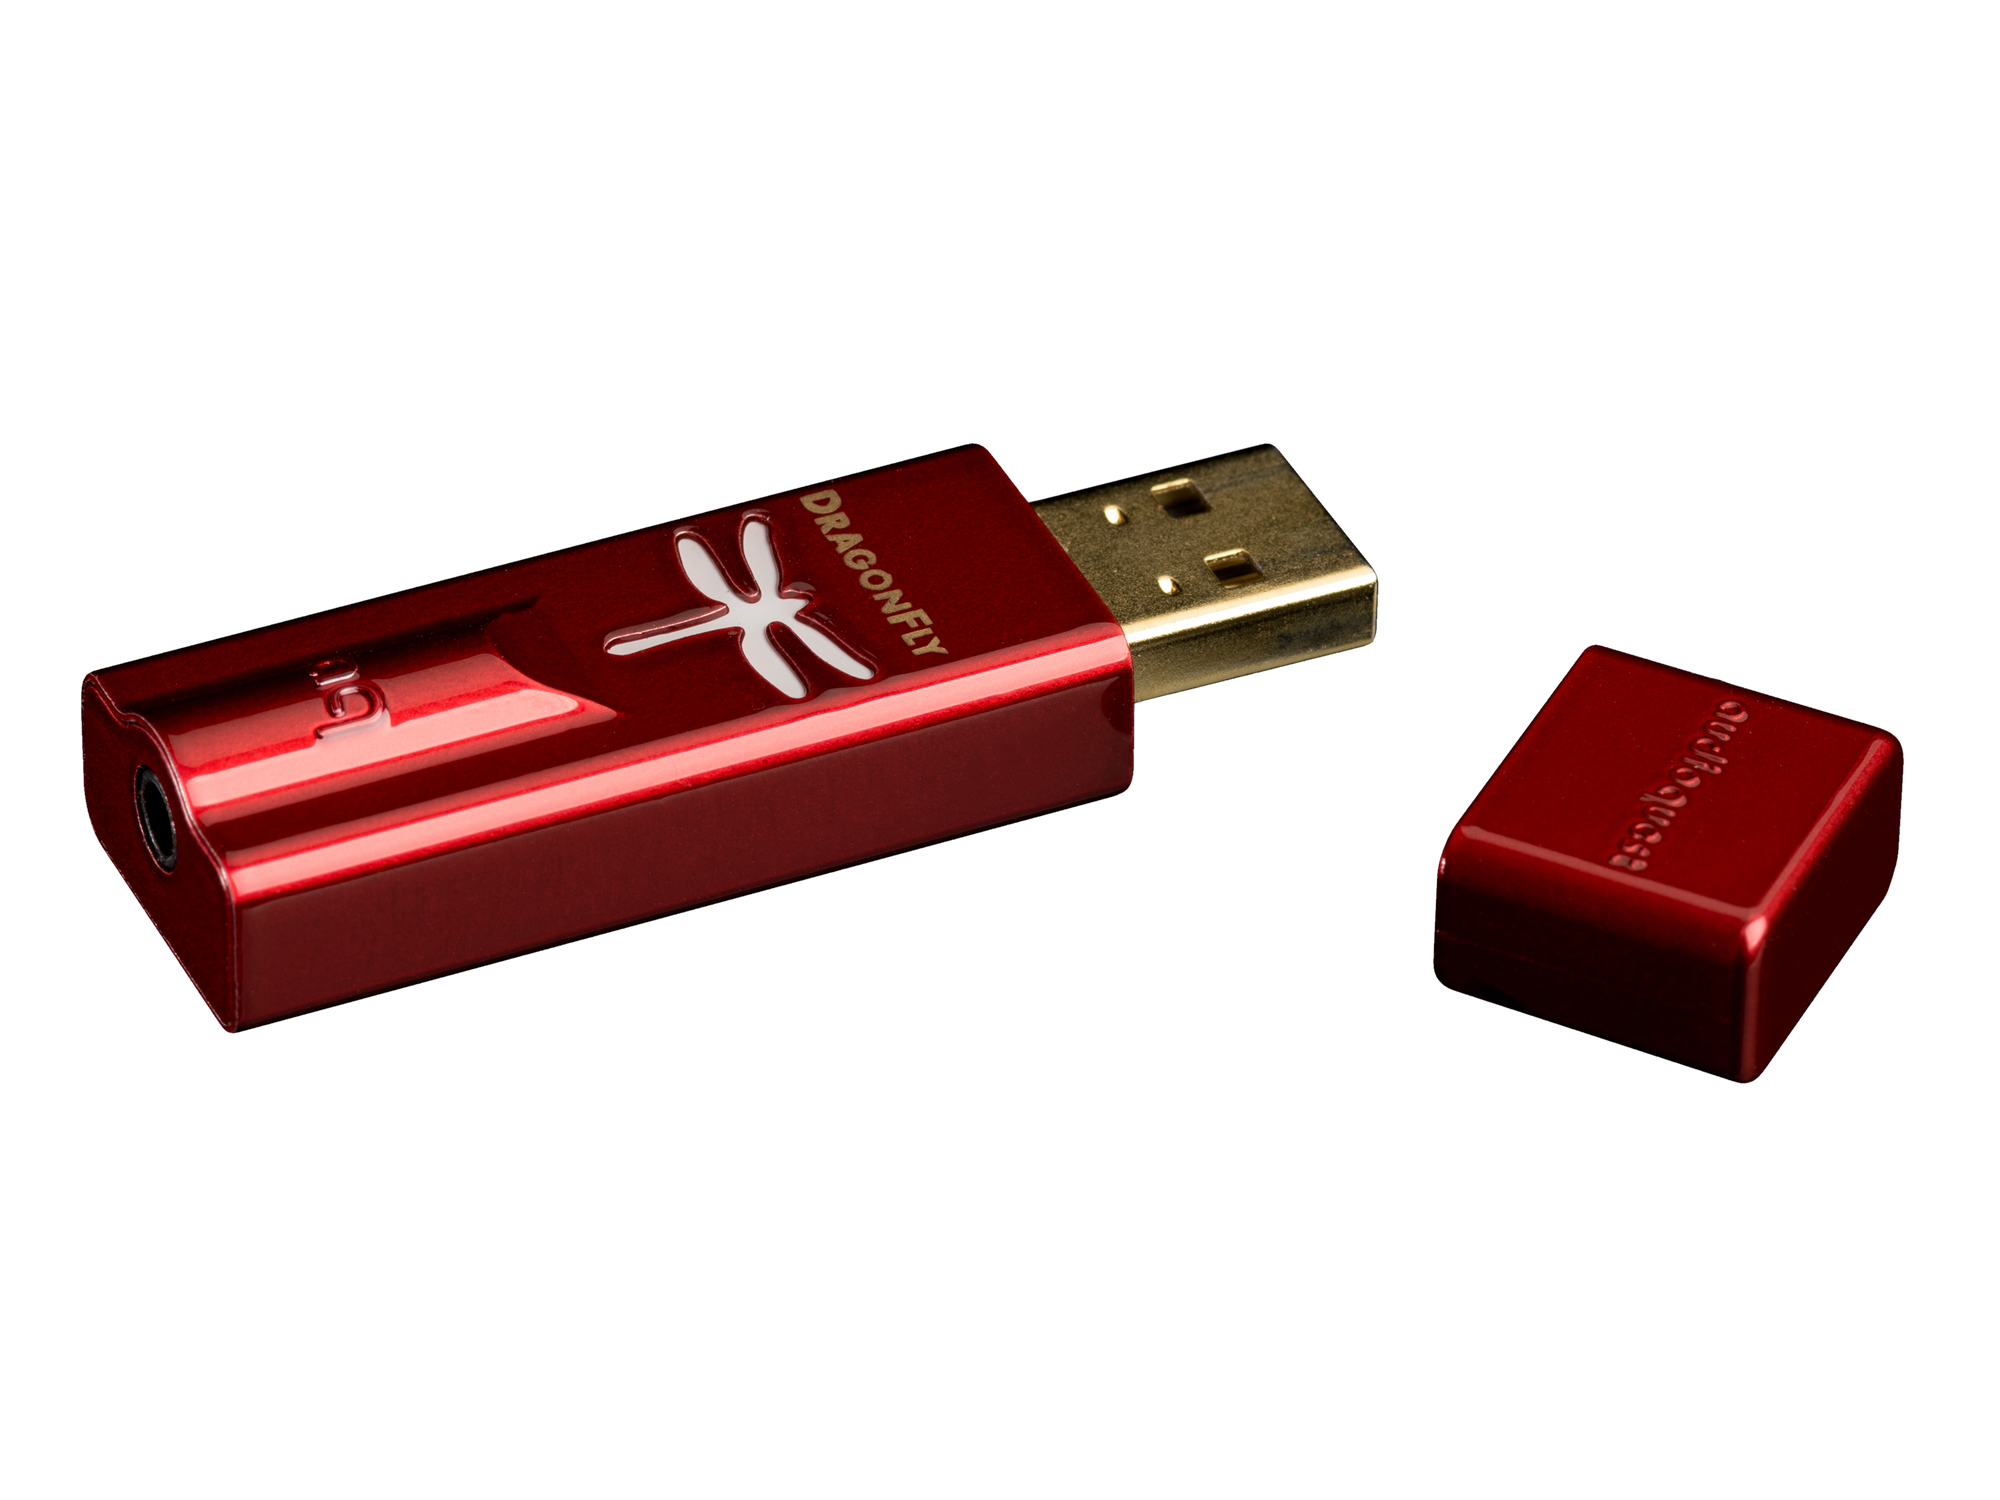 Audioquest Dragonfly Red USB DAC & Preamp & Headphone Amp